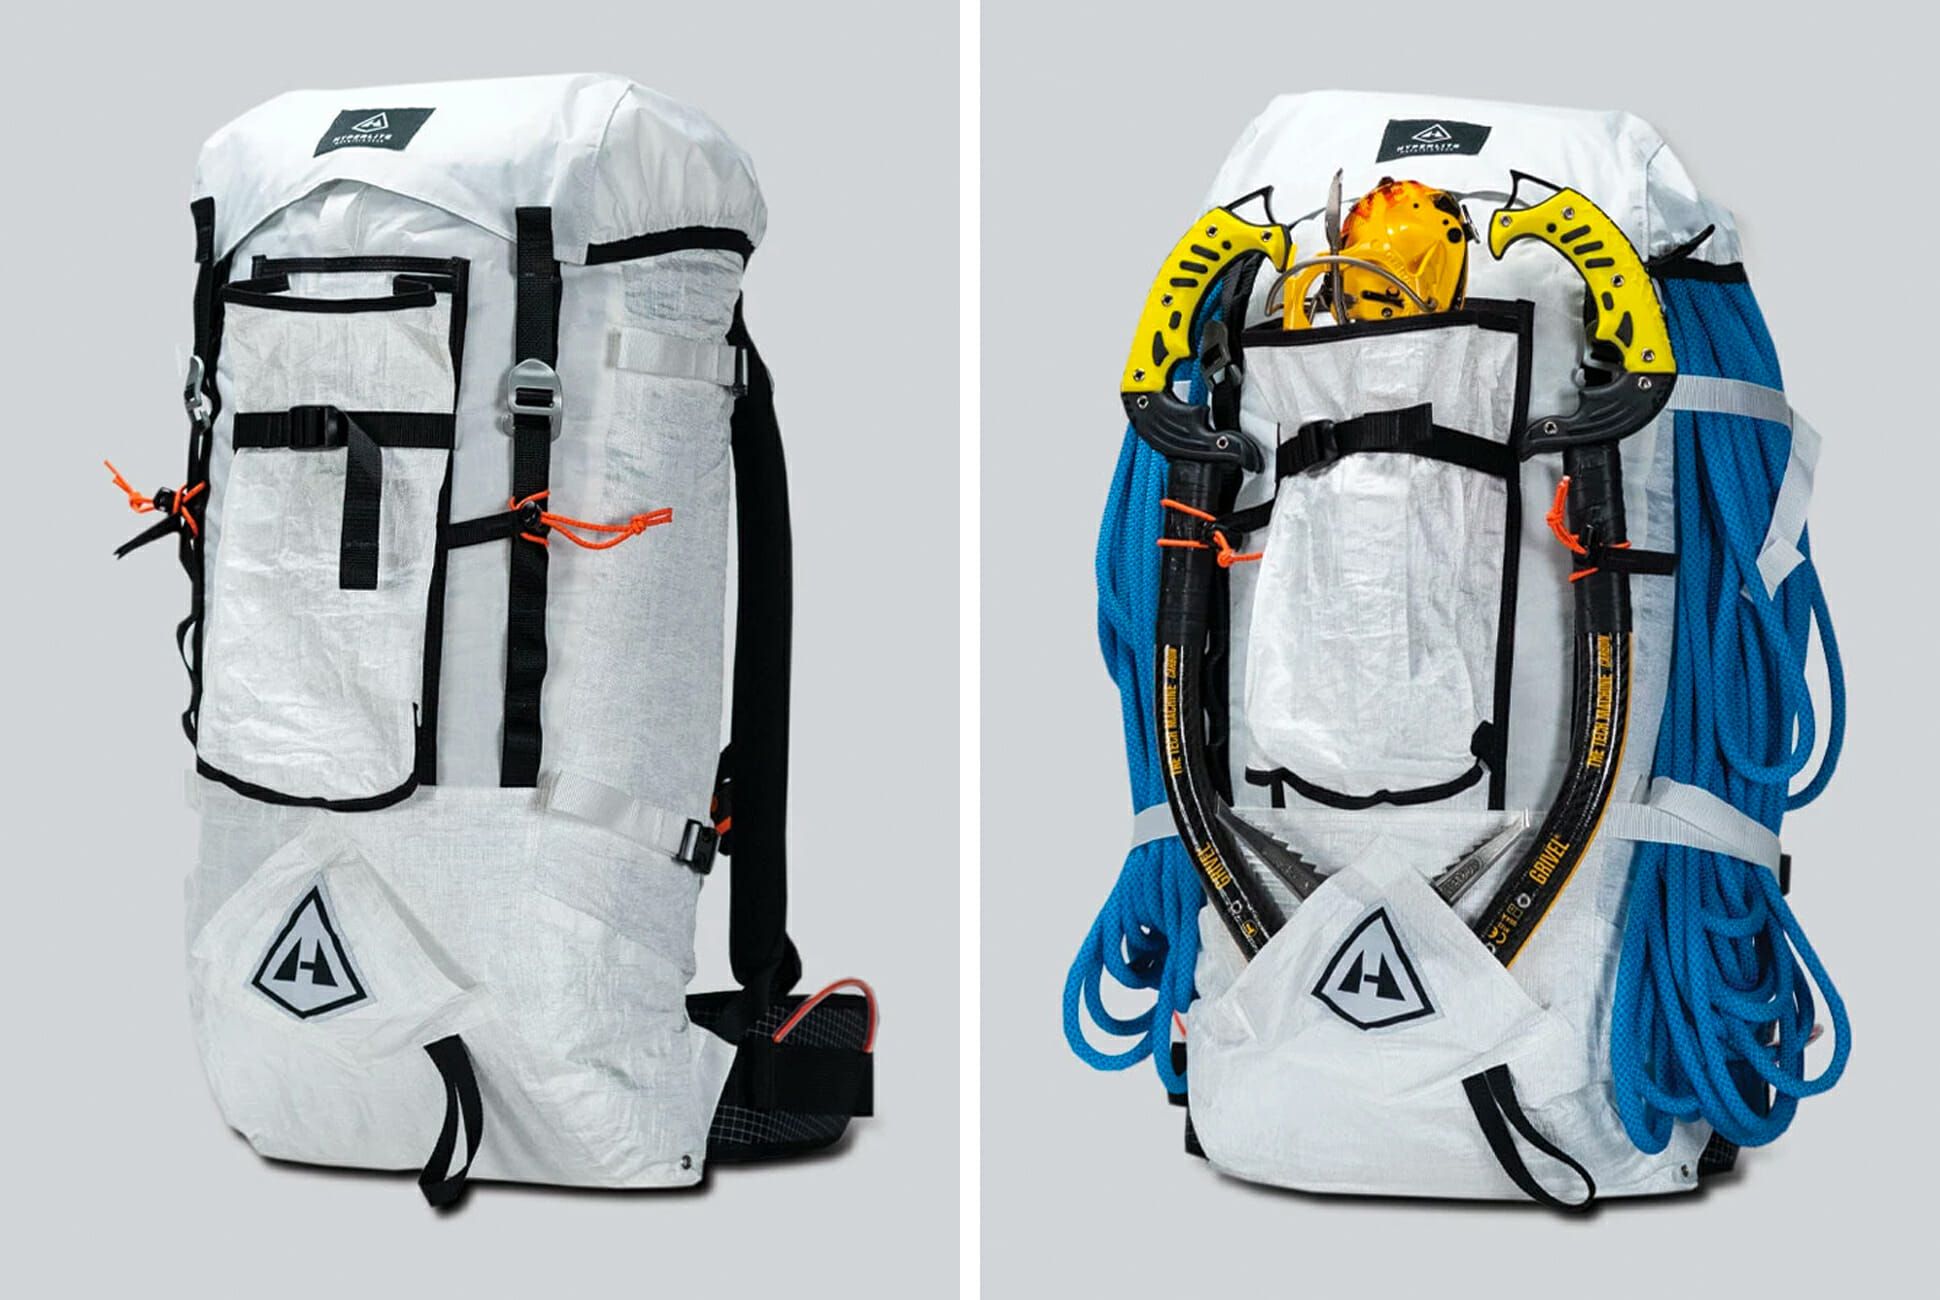 At Last, a New Ultralight Backpack with Tons of Features